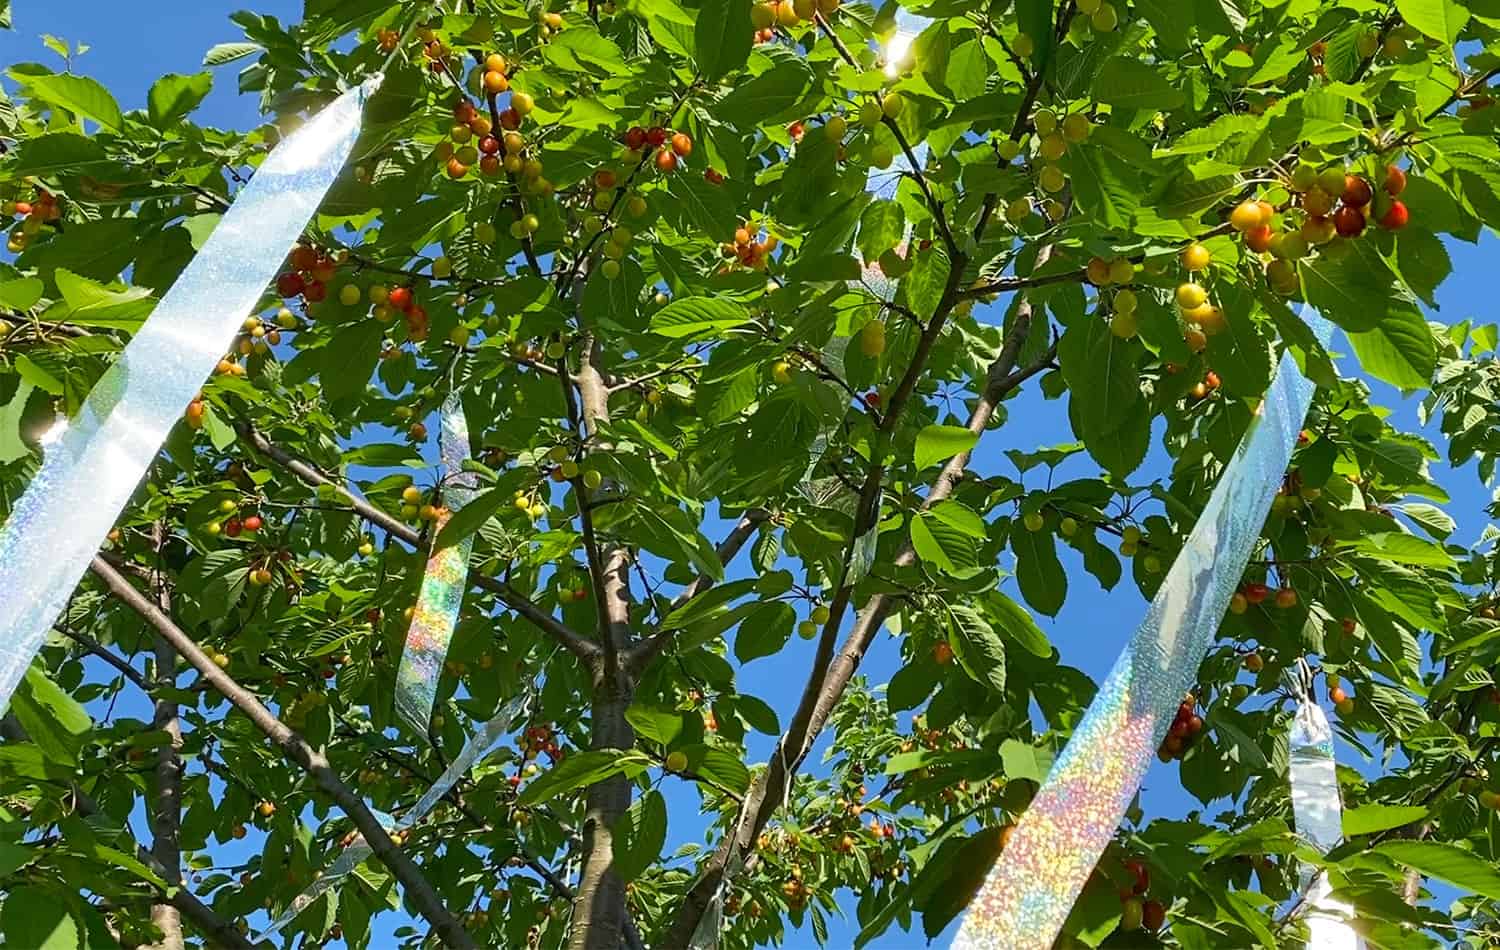 How To Protect Fruit On Trees From Birds